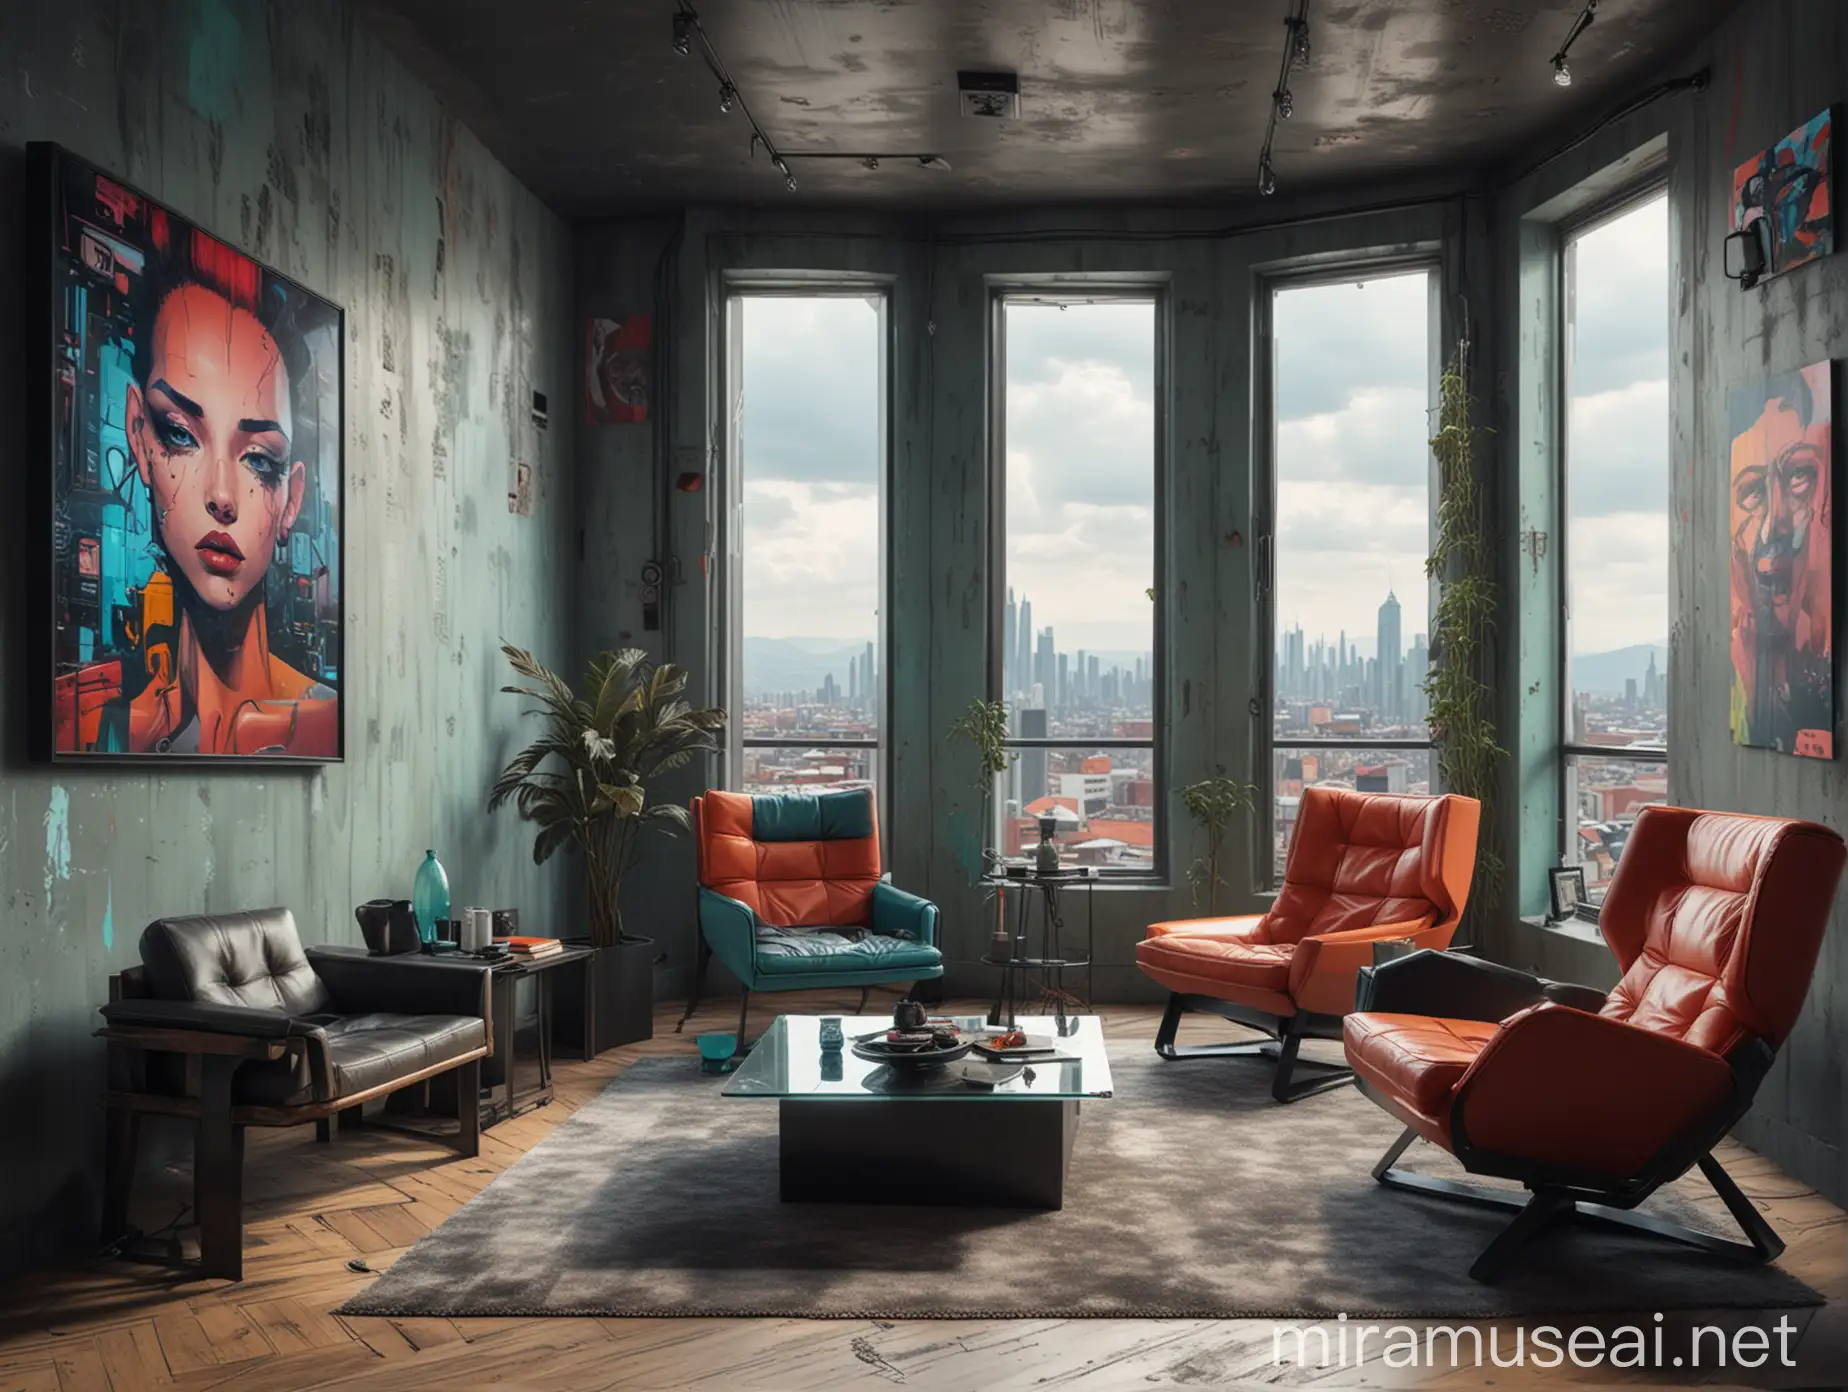 Cyberpunk Modern Apartment with Stylish Armchairs and Artistic Wall Paintings